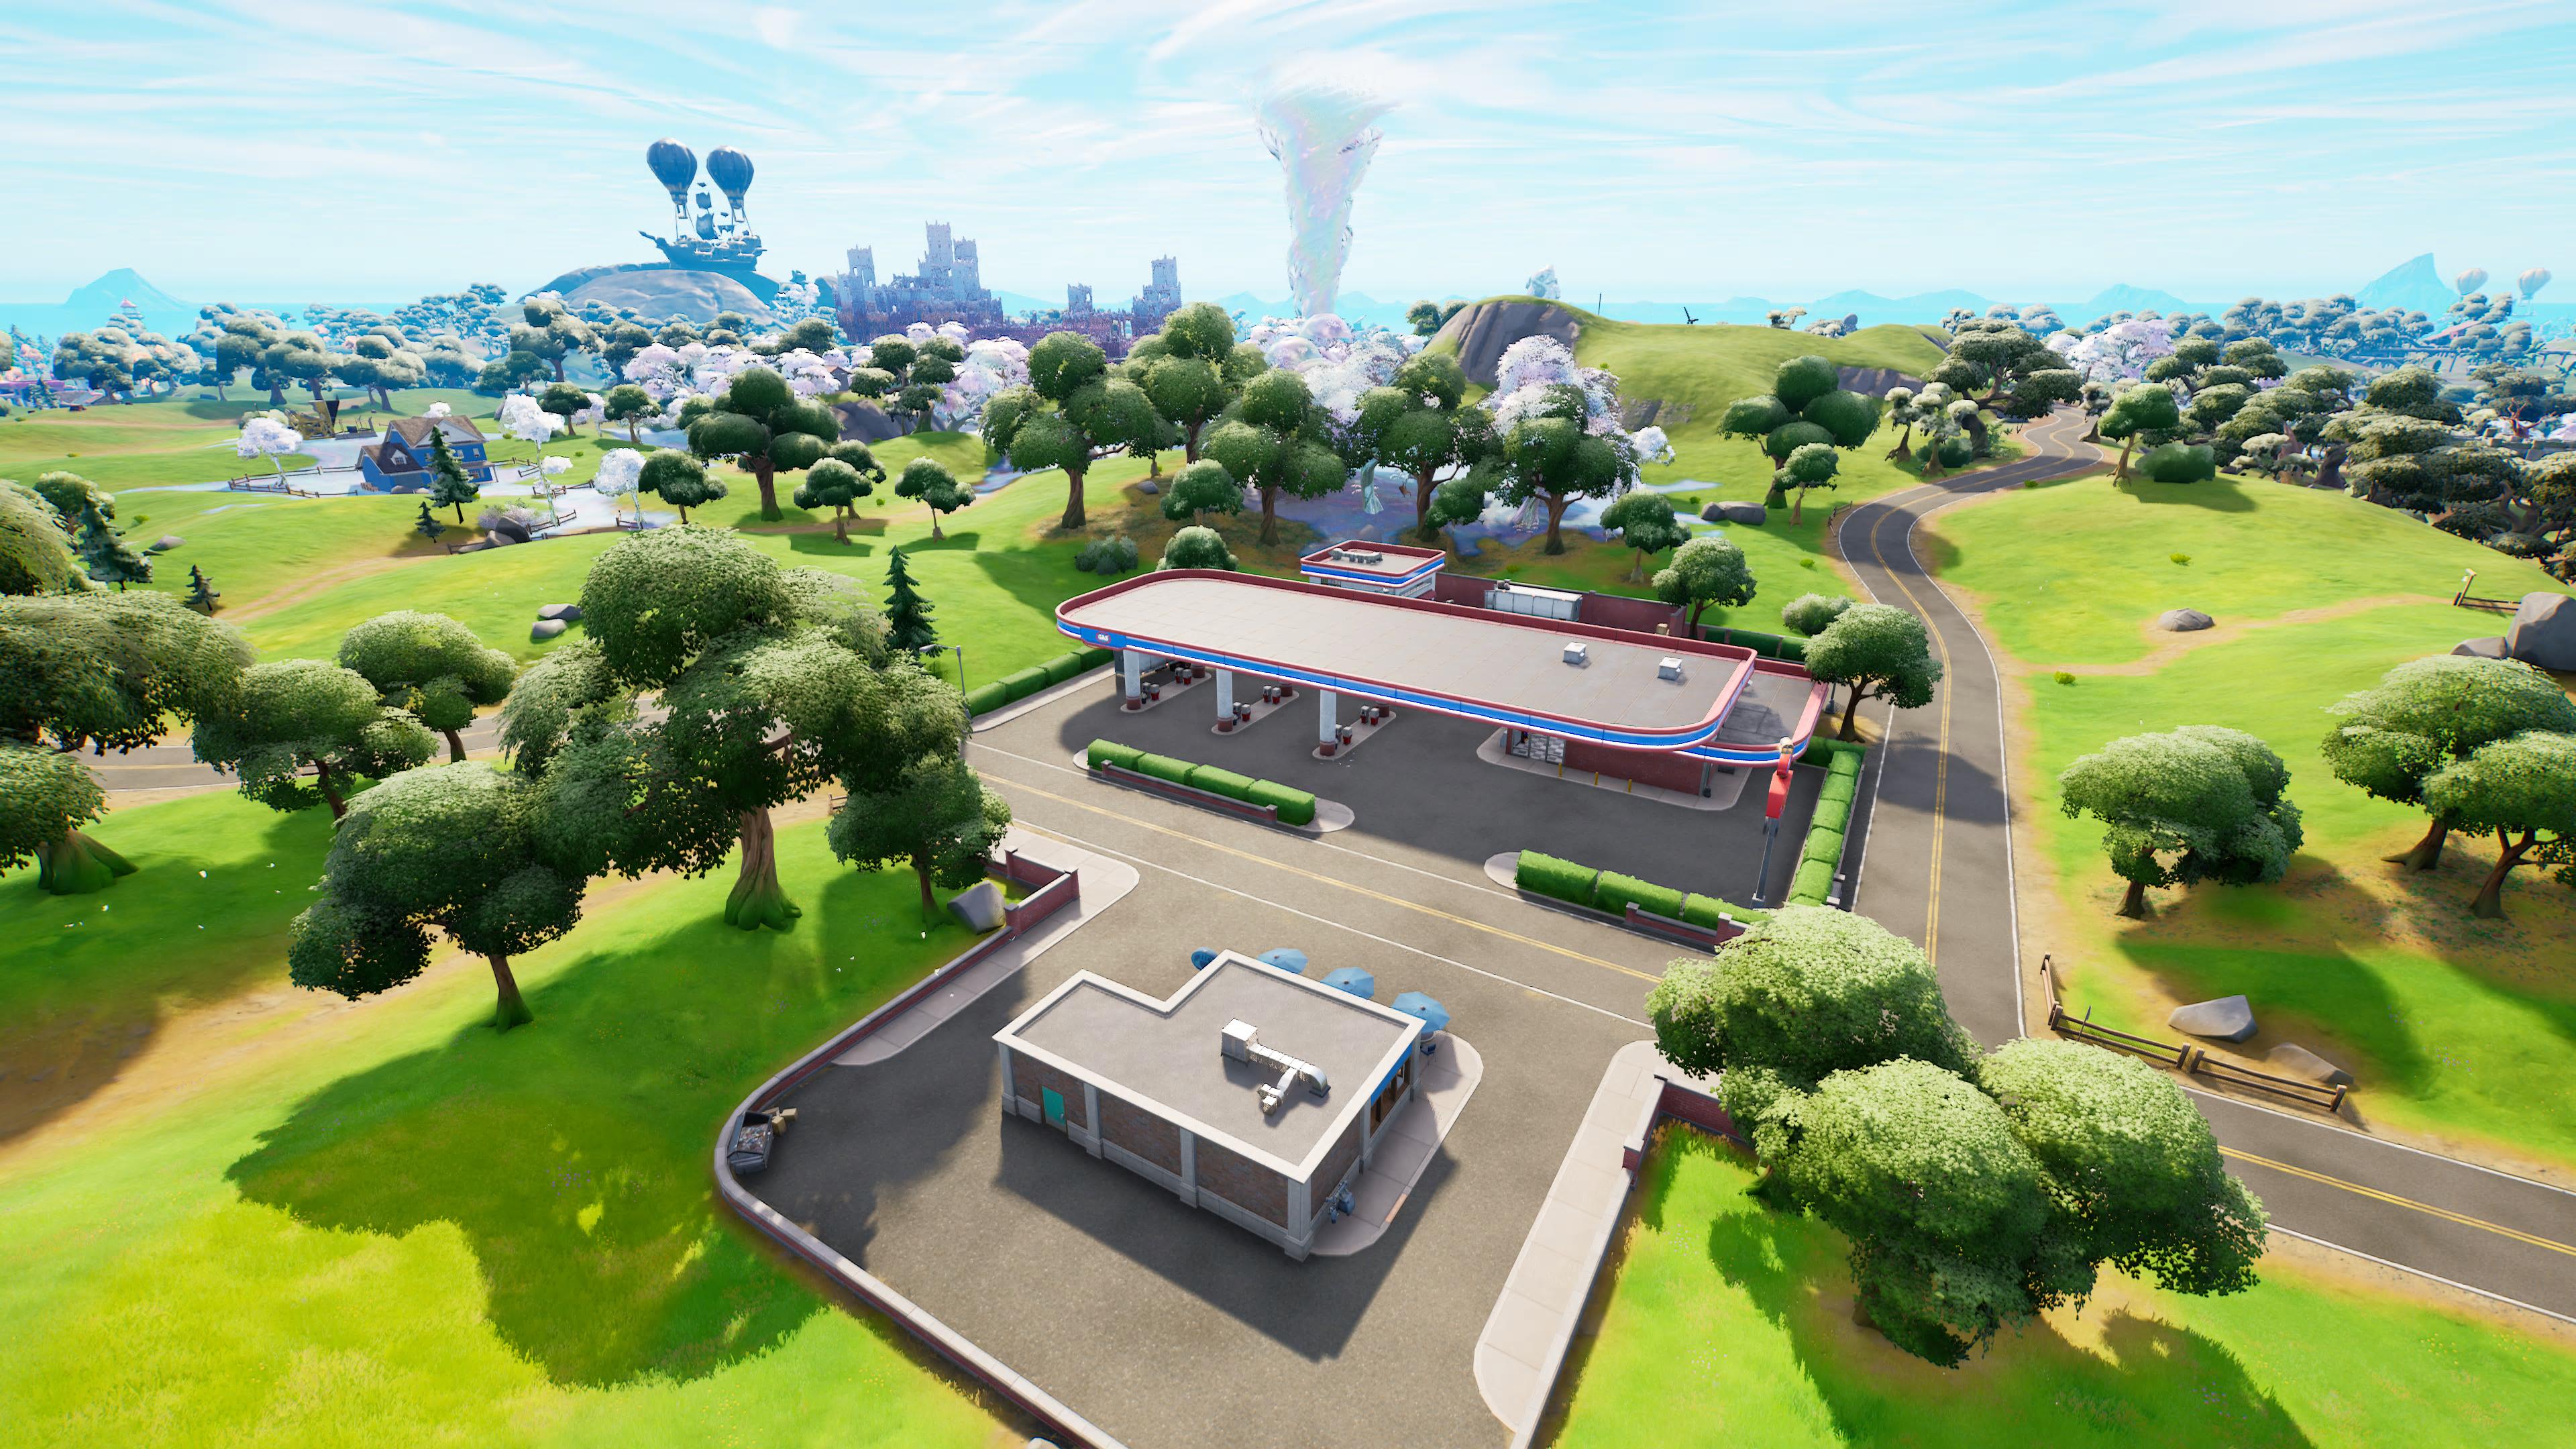 Gas Station in Fortnite.